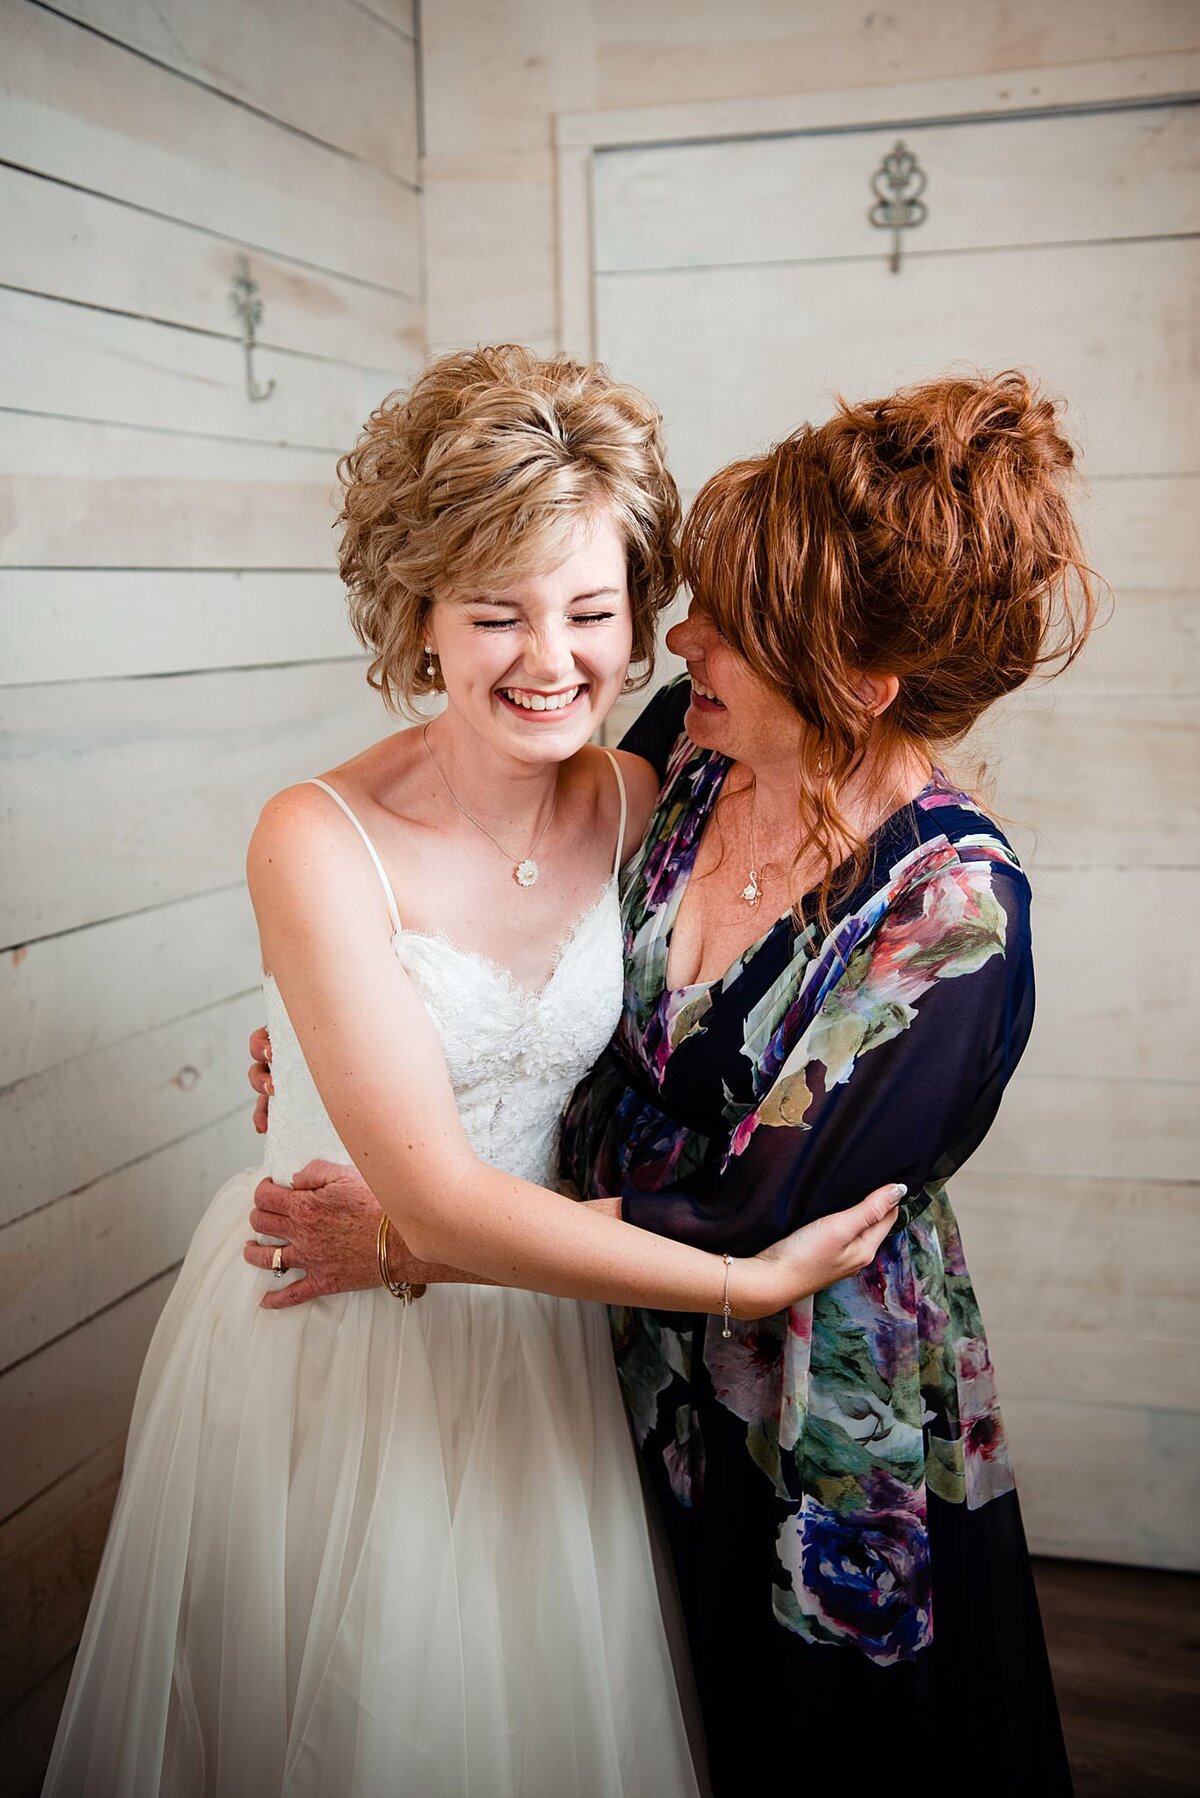 Mother hugging her daughter and sharing a laugh while getting into her wedding dress